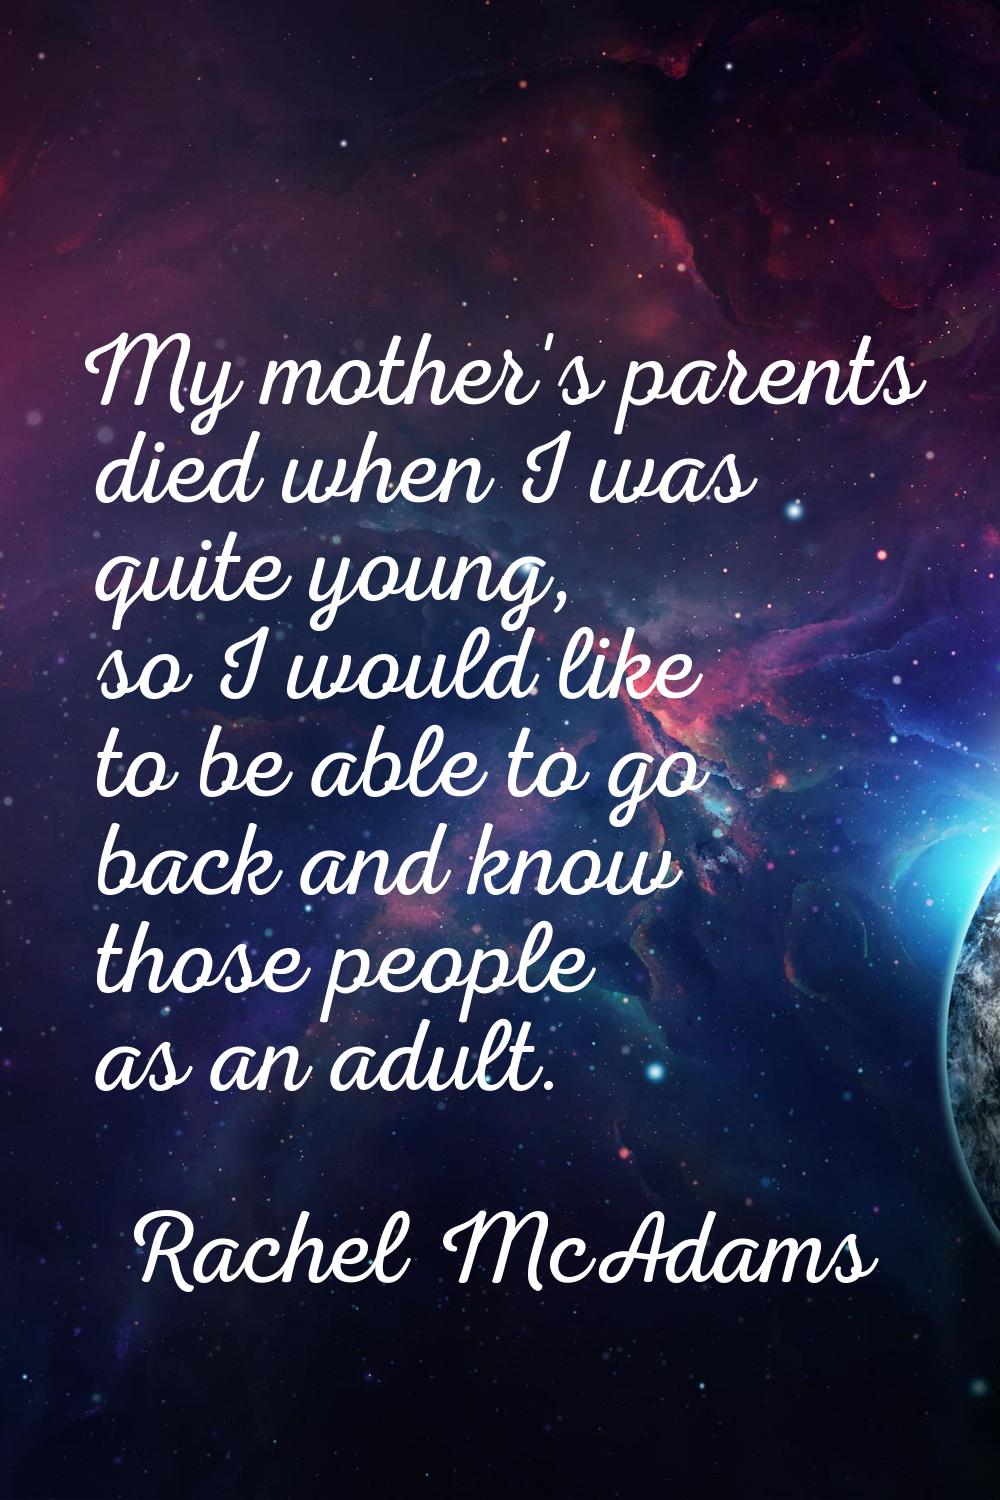 My mother's parents died when I was quite young, so I would like to be able to go back and know tho